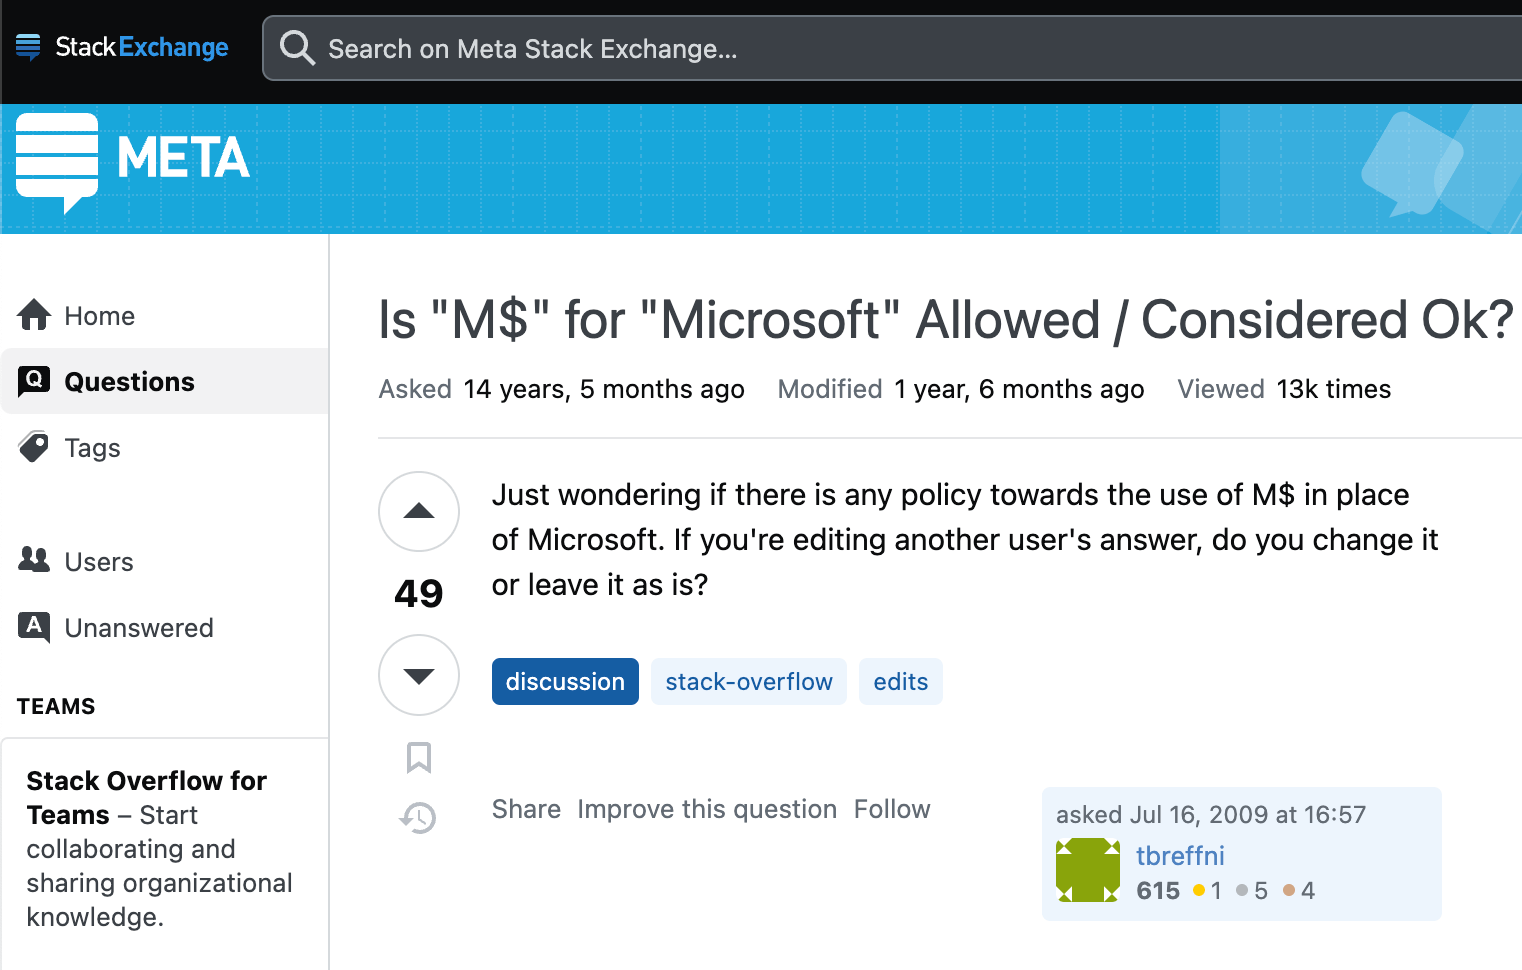 Discussion of whether the M$ abbreviation is appropriate on StackExchange